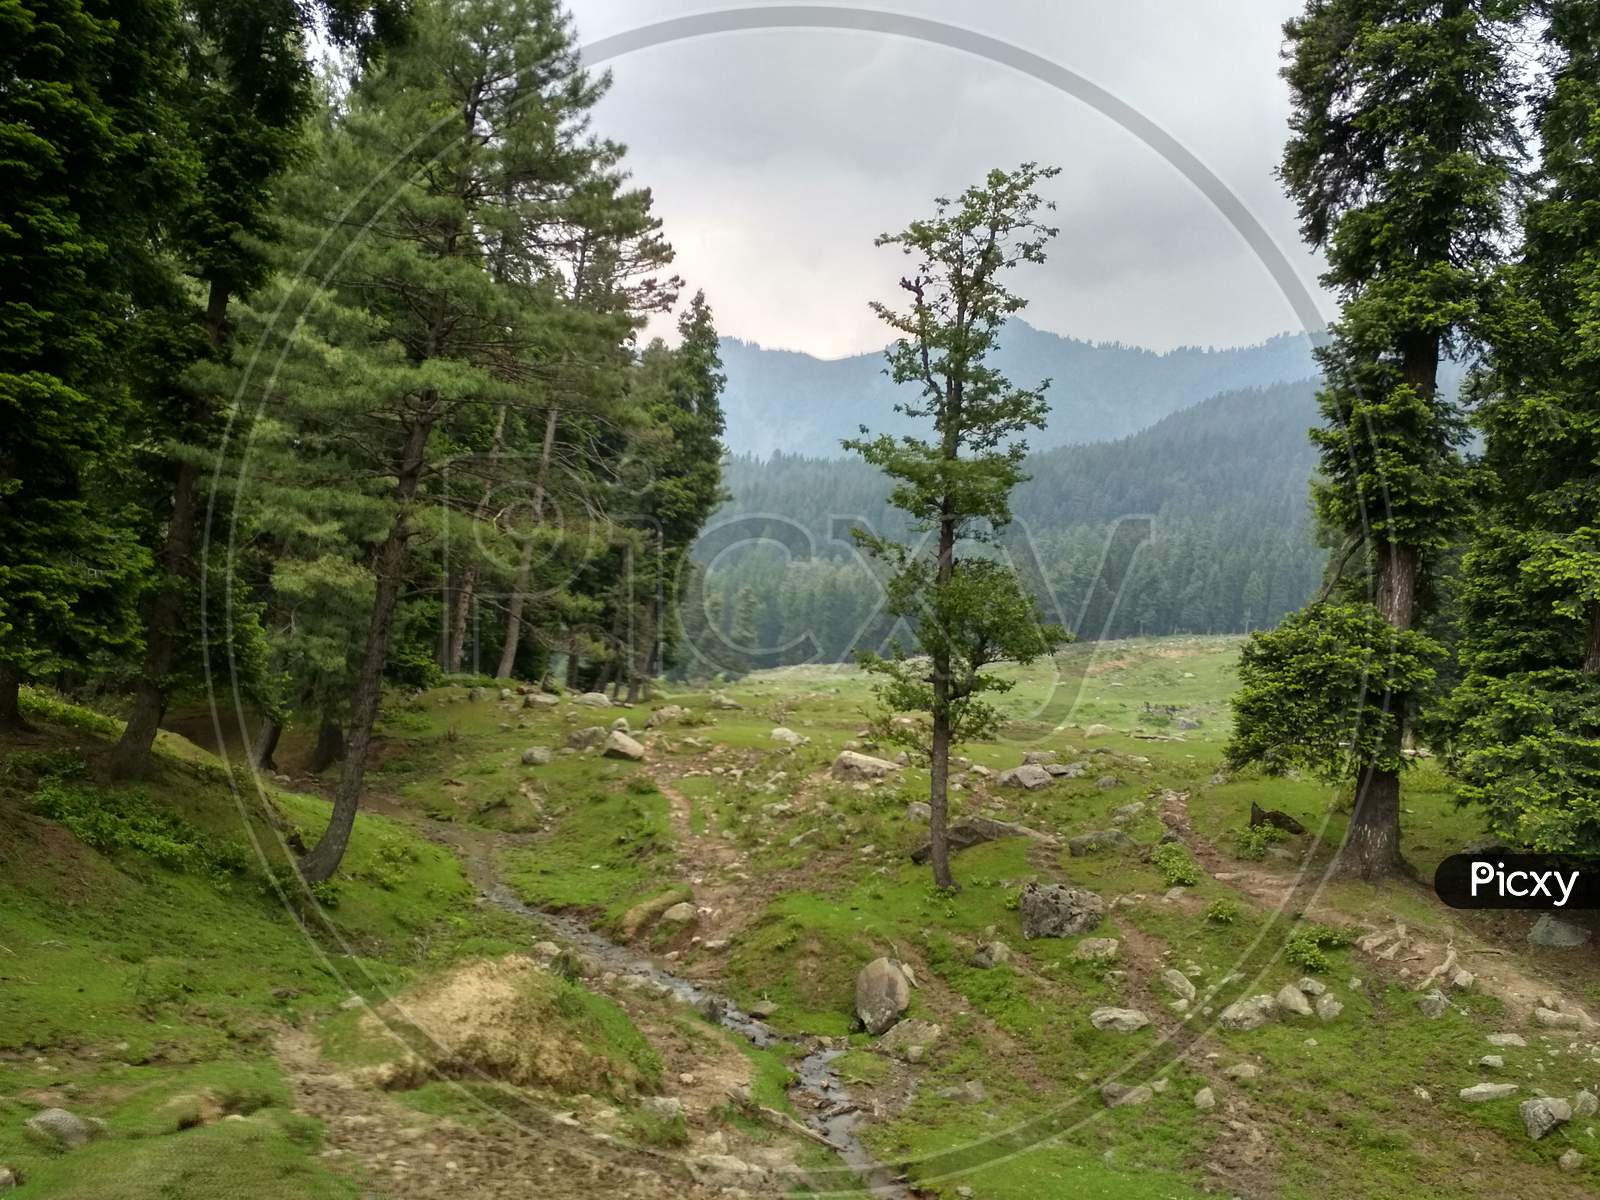 A Beautiful view and environment of deenu valley in Kashmir